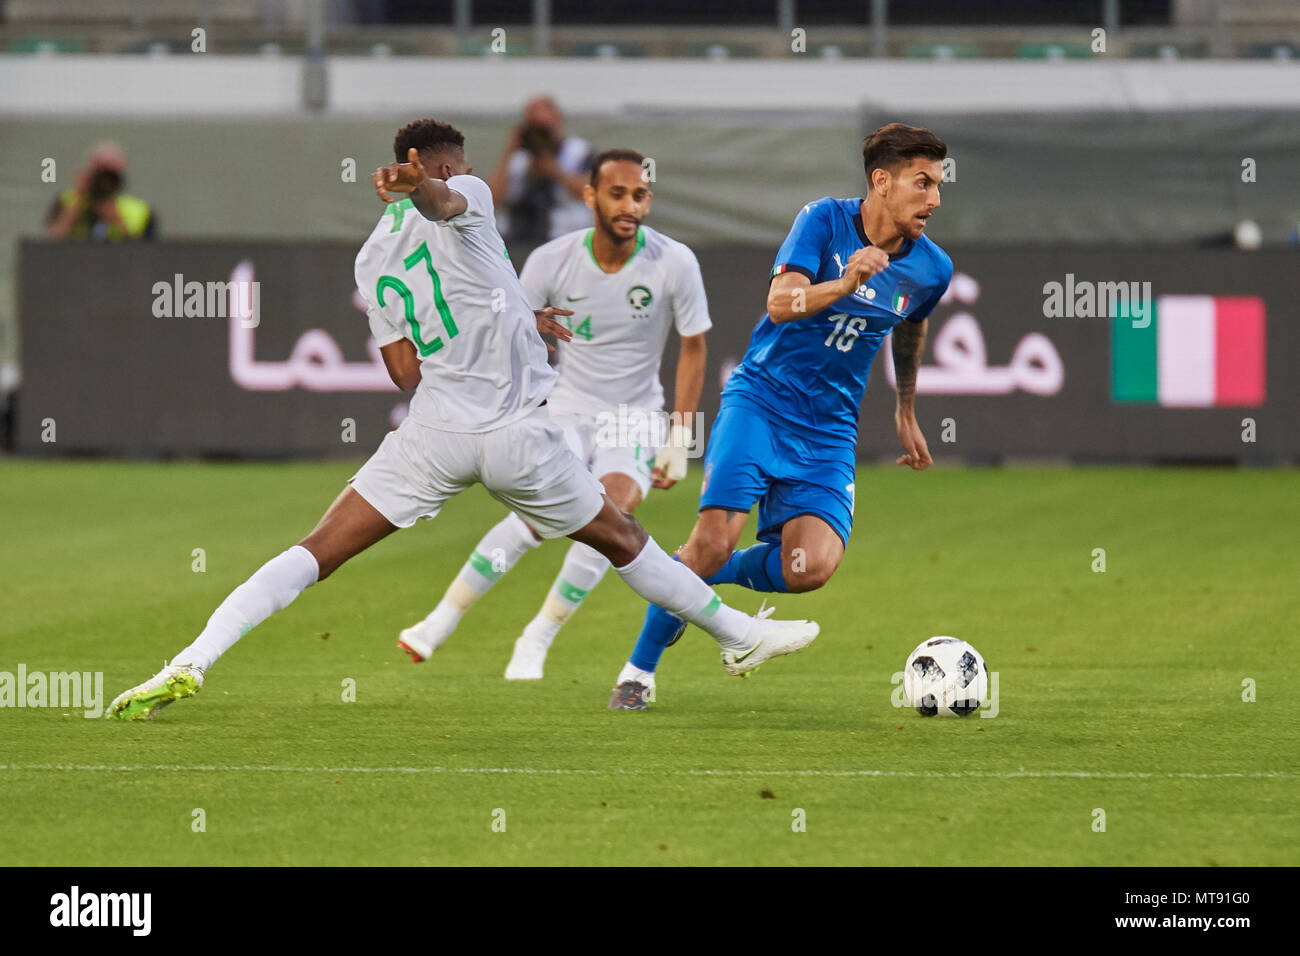 St. Gallen, Switzerland. 28th May 2018. Mohamed Kanno and Lorenzo Pellegrini during the football World Cup 2018 preparation match Italy vs. Saudi Arabia in St. Gallen. The national team from Saudi Arabia is using the game to prepare for the 2018 FIFA World Cup final tournament in Russia while Italy did not qualify for the World Cup finals. Stock Photo